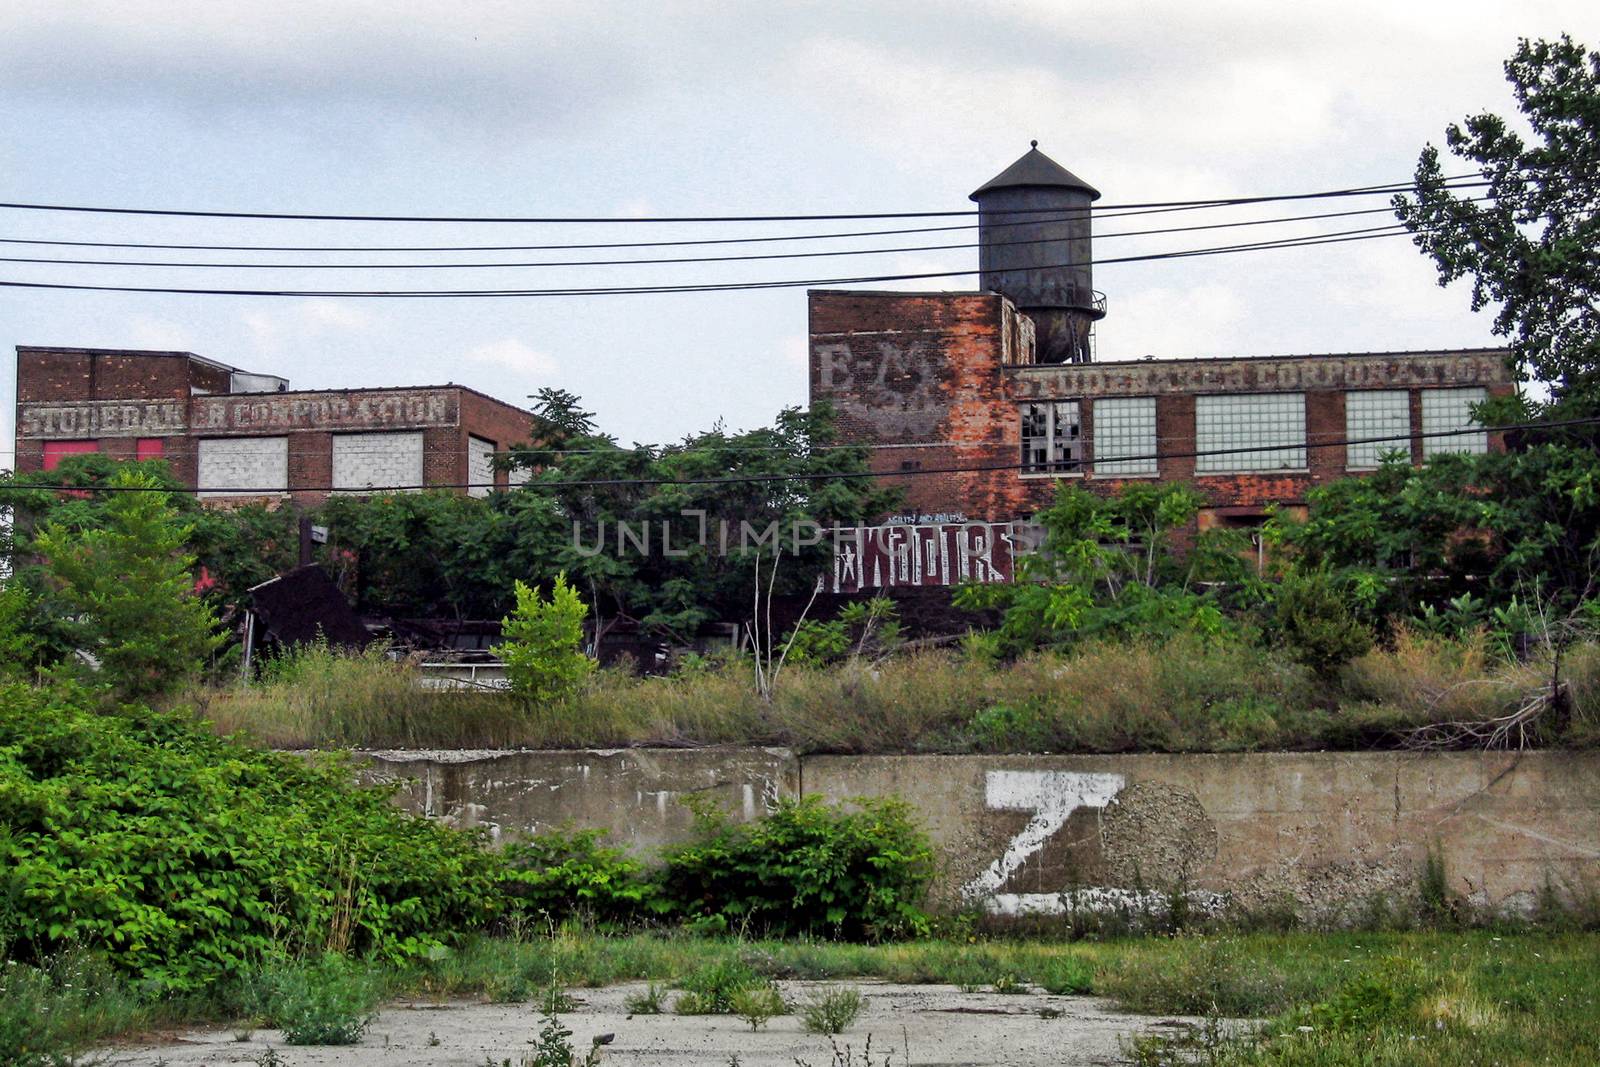 Abandoned auto factory used to employ thousands of people.